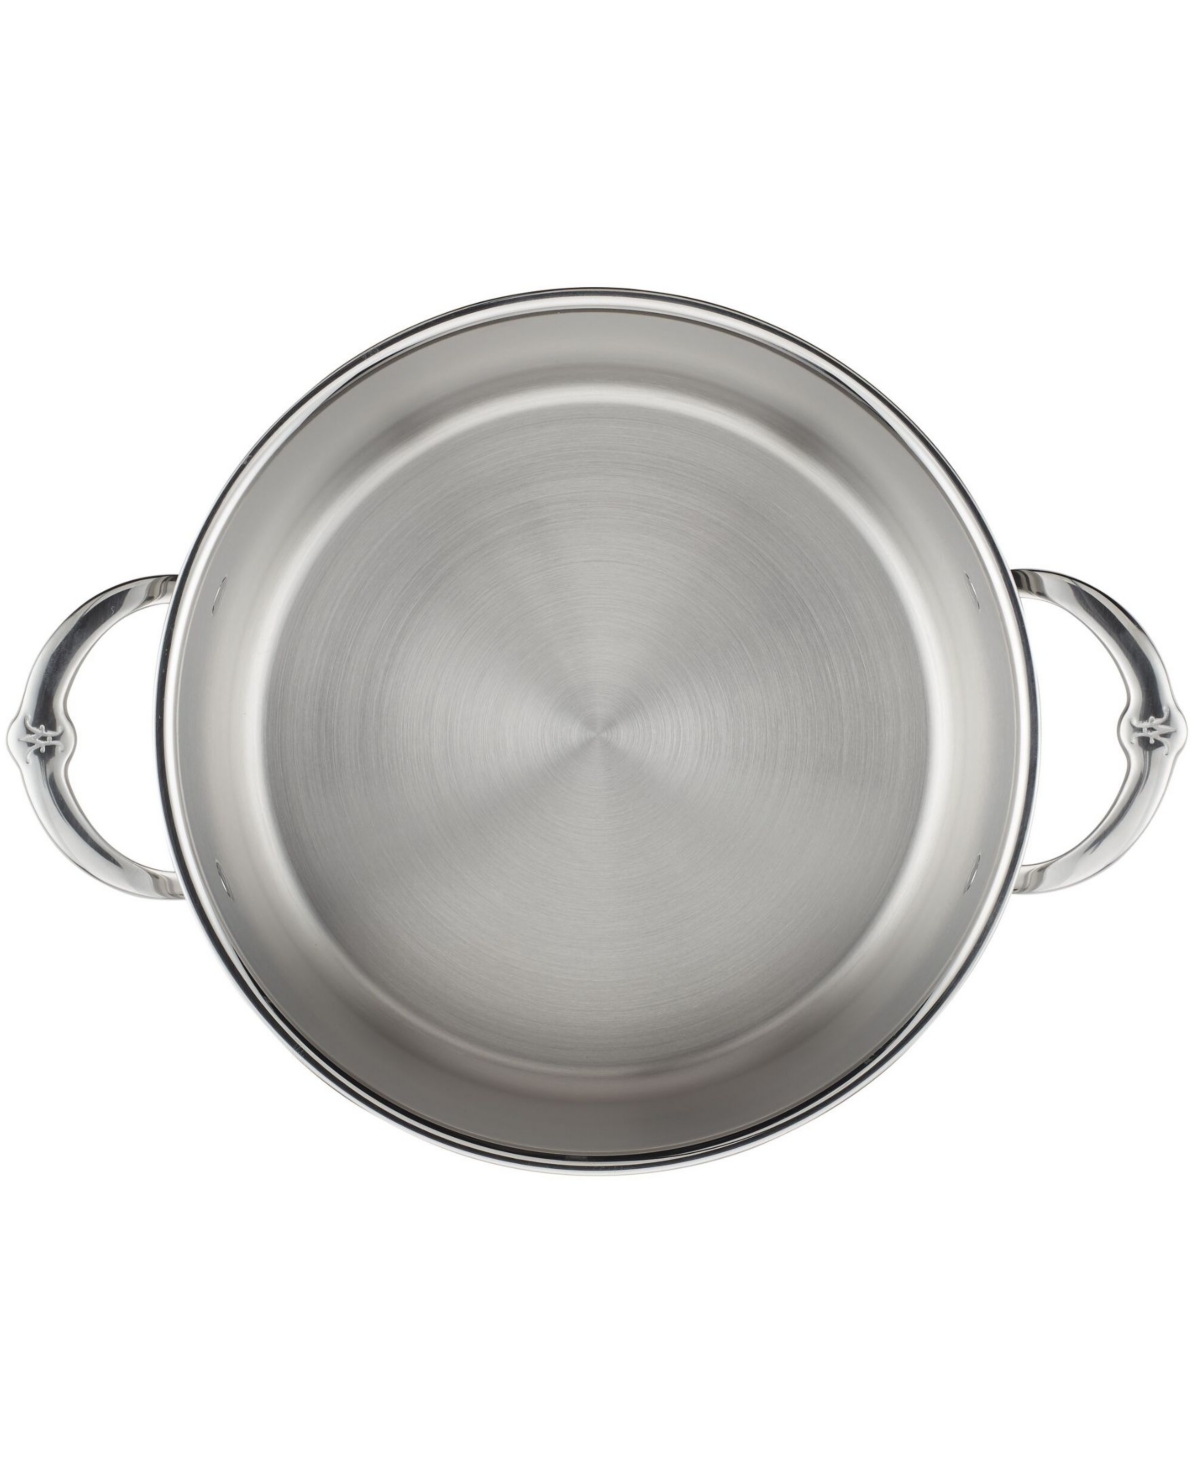 Shop Hestan Probond Clad Stainless Steel 8-quart Covered Stock Pot In Silver